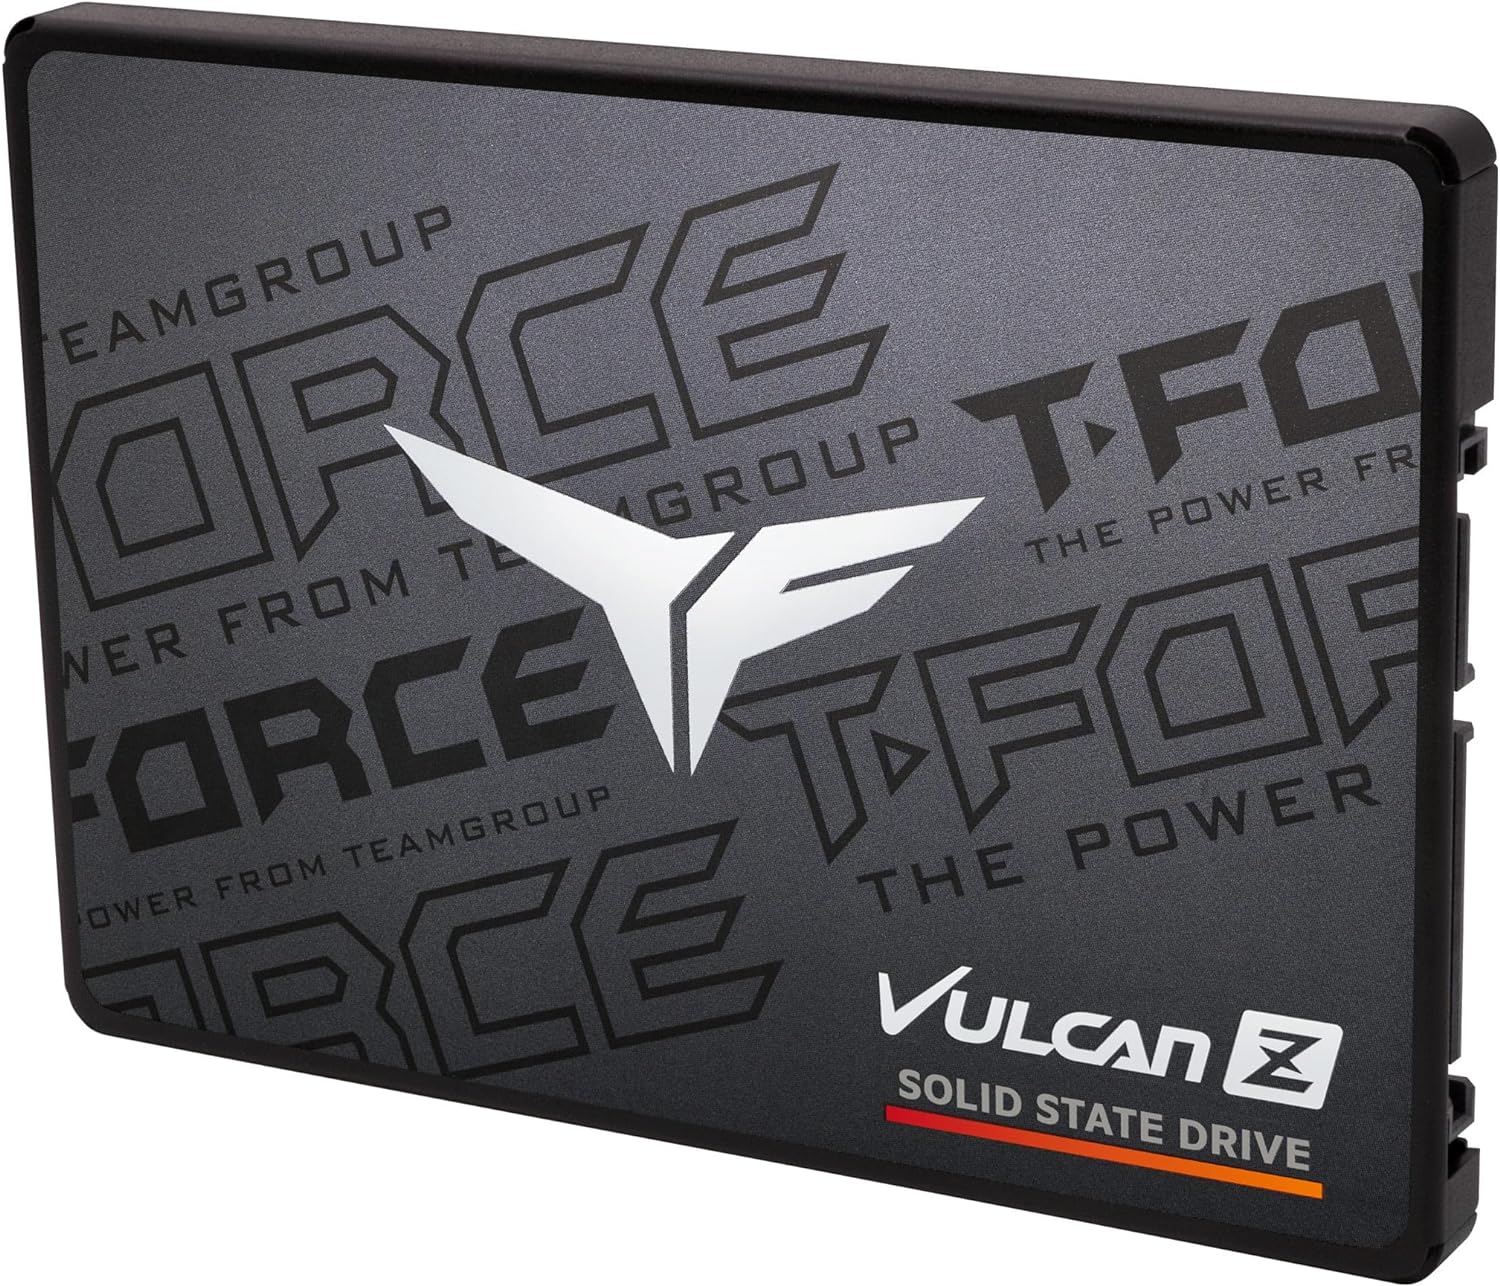 Now cheaper! Teamgroup T-Force Vulcan Z 240GB SLC Cache 3D NAND TLC 2.5" SATAIII internal SSD $17.99 at Amazon